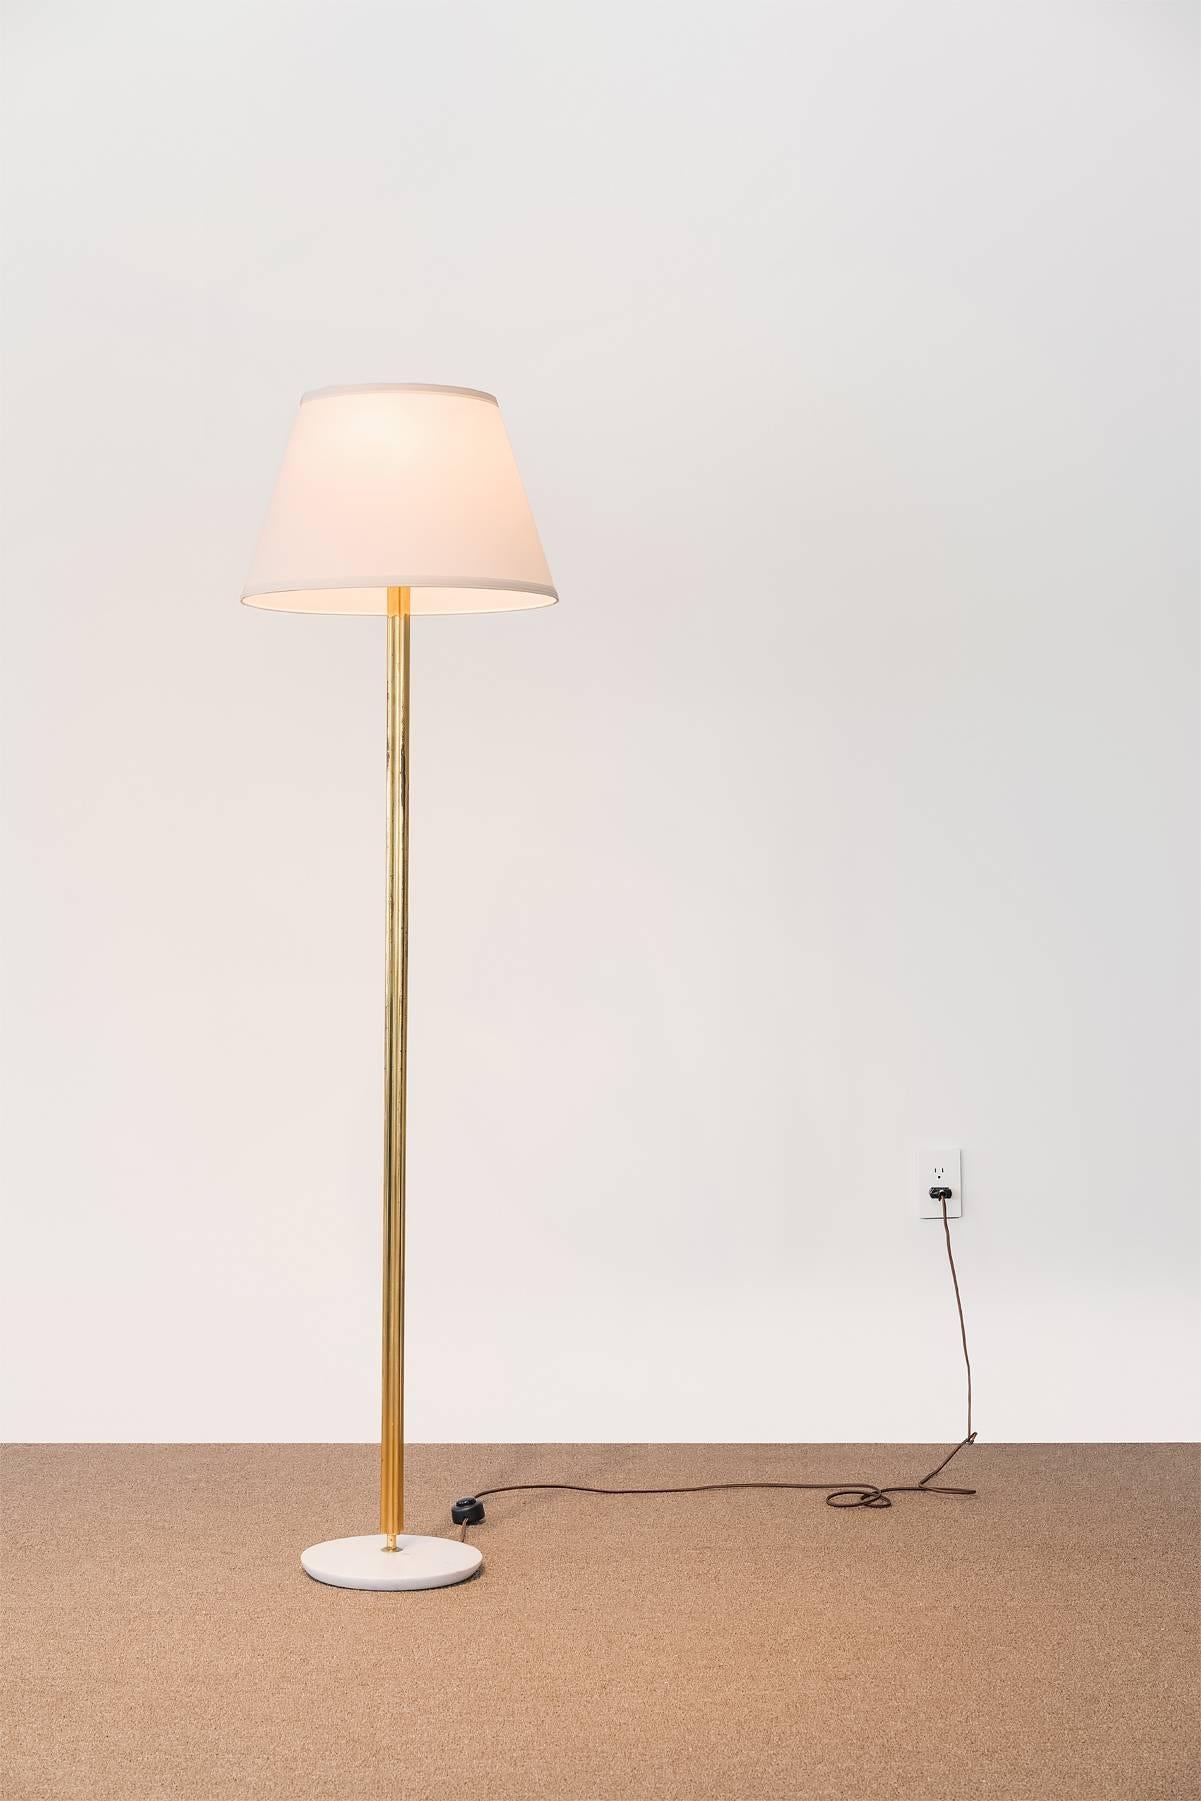 A floor lamp attributed to Italian designer Angelo Lelii for Arredoluce, Italy. Brass rod, marble base. 

 In the past, the designer's name has been misspelled as Angello Lelli or Angelo Lelli.

Angelo Lelii is one of many famous designers working